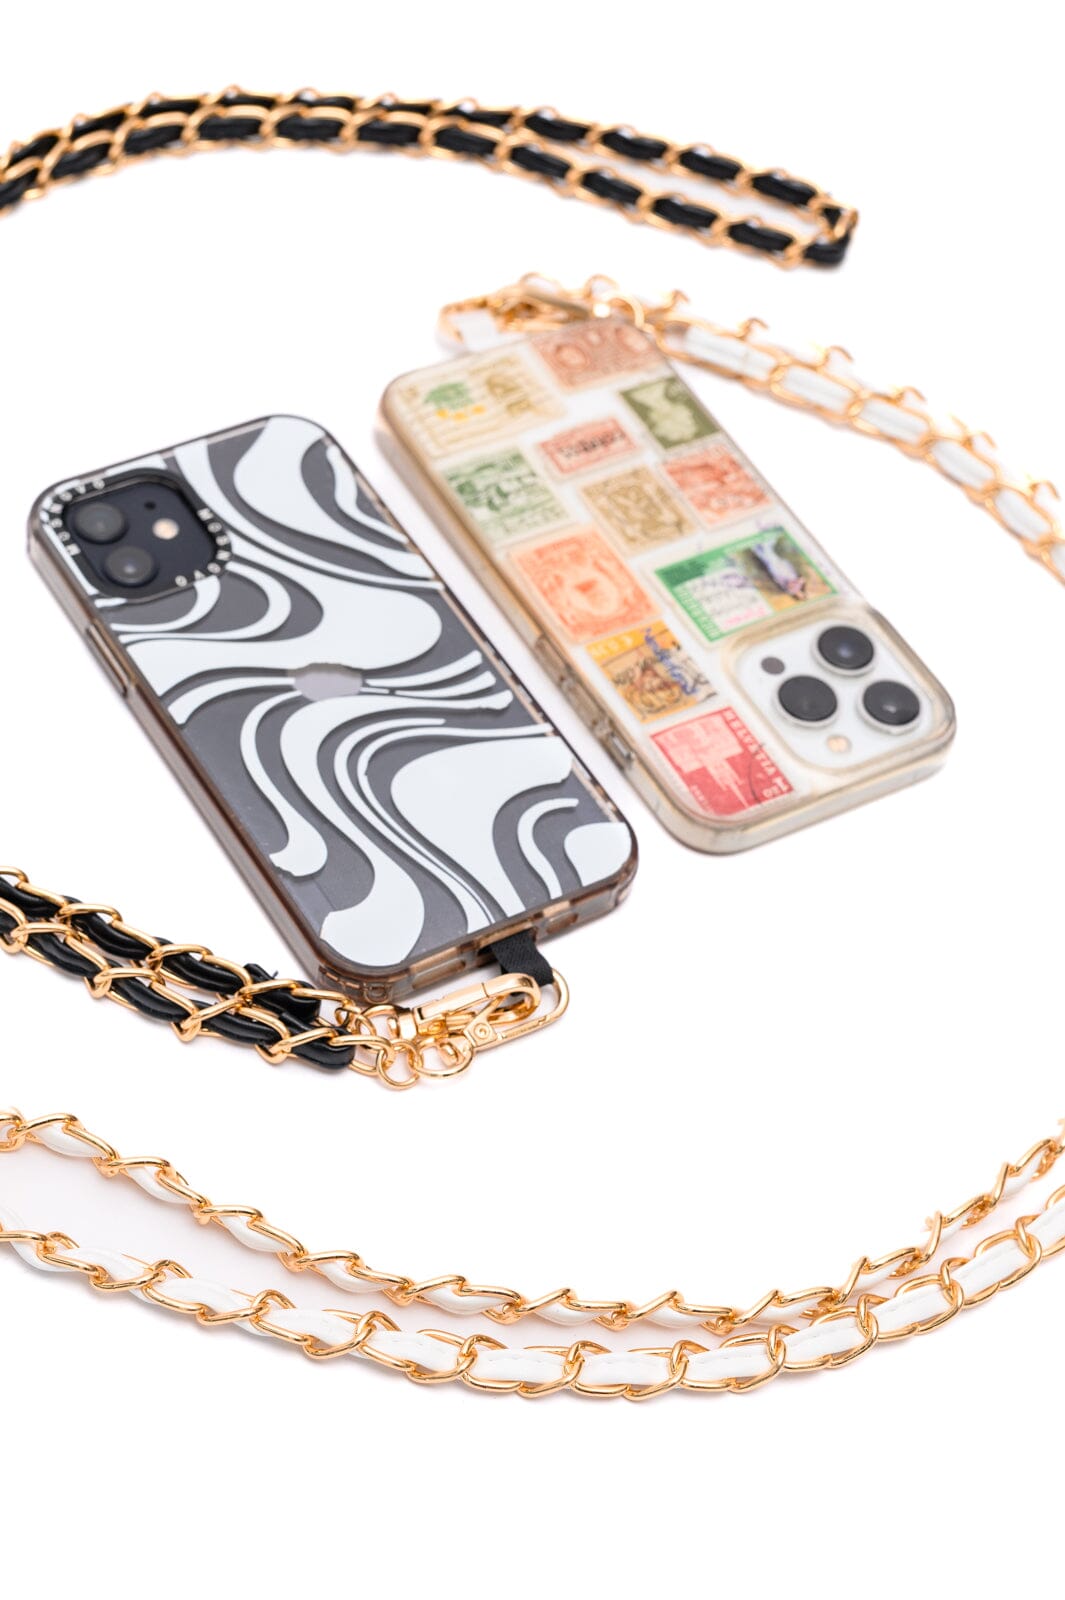 PU Leather Gold Chain Cell Phone Lanyard Set of 2 Accessories Ave Shops 